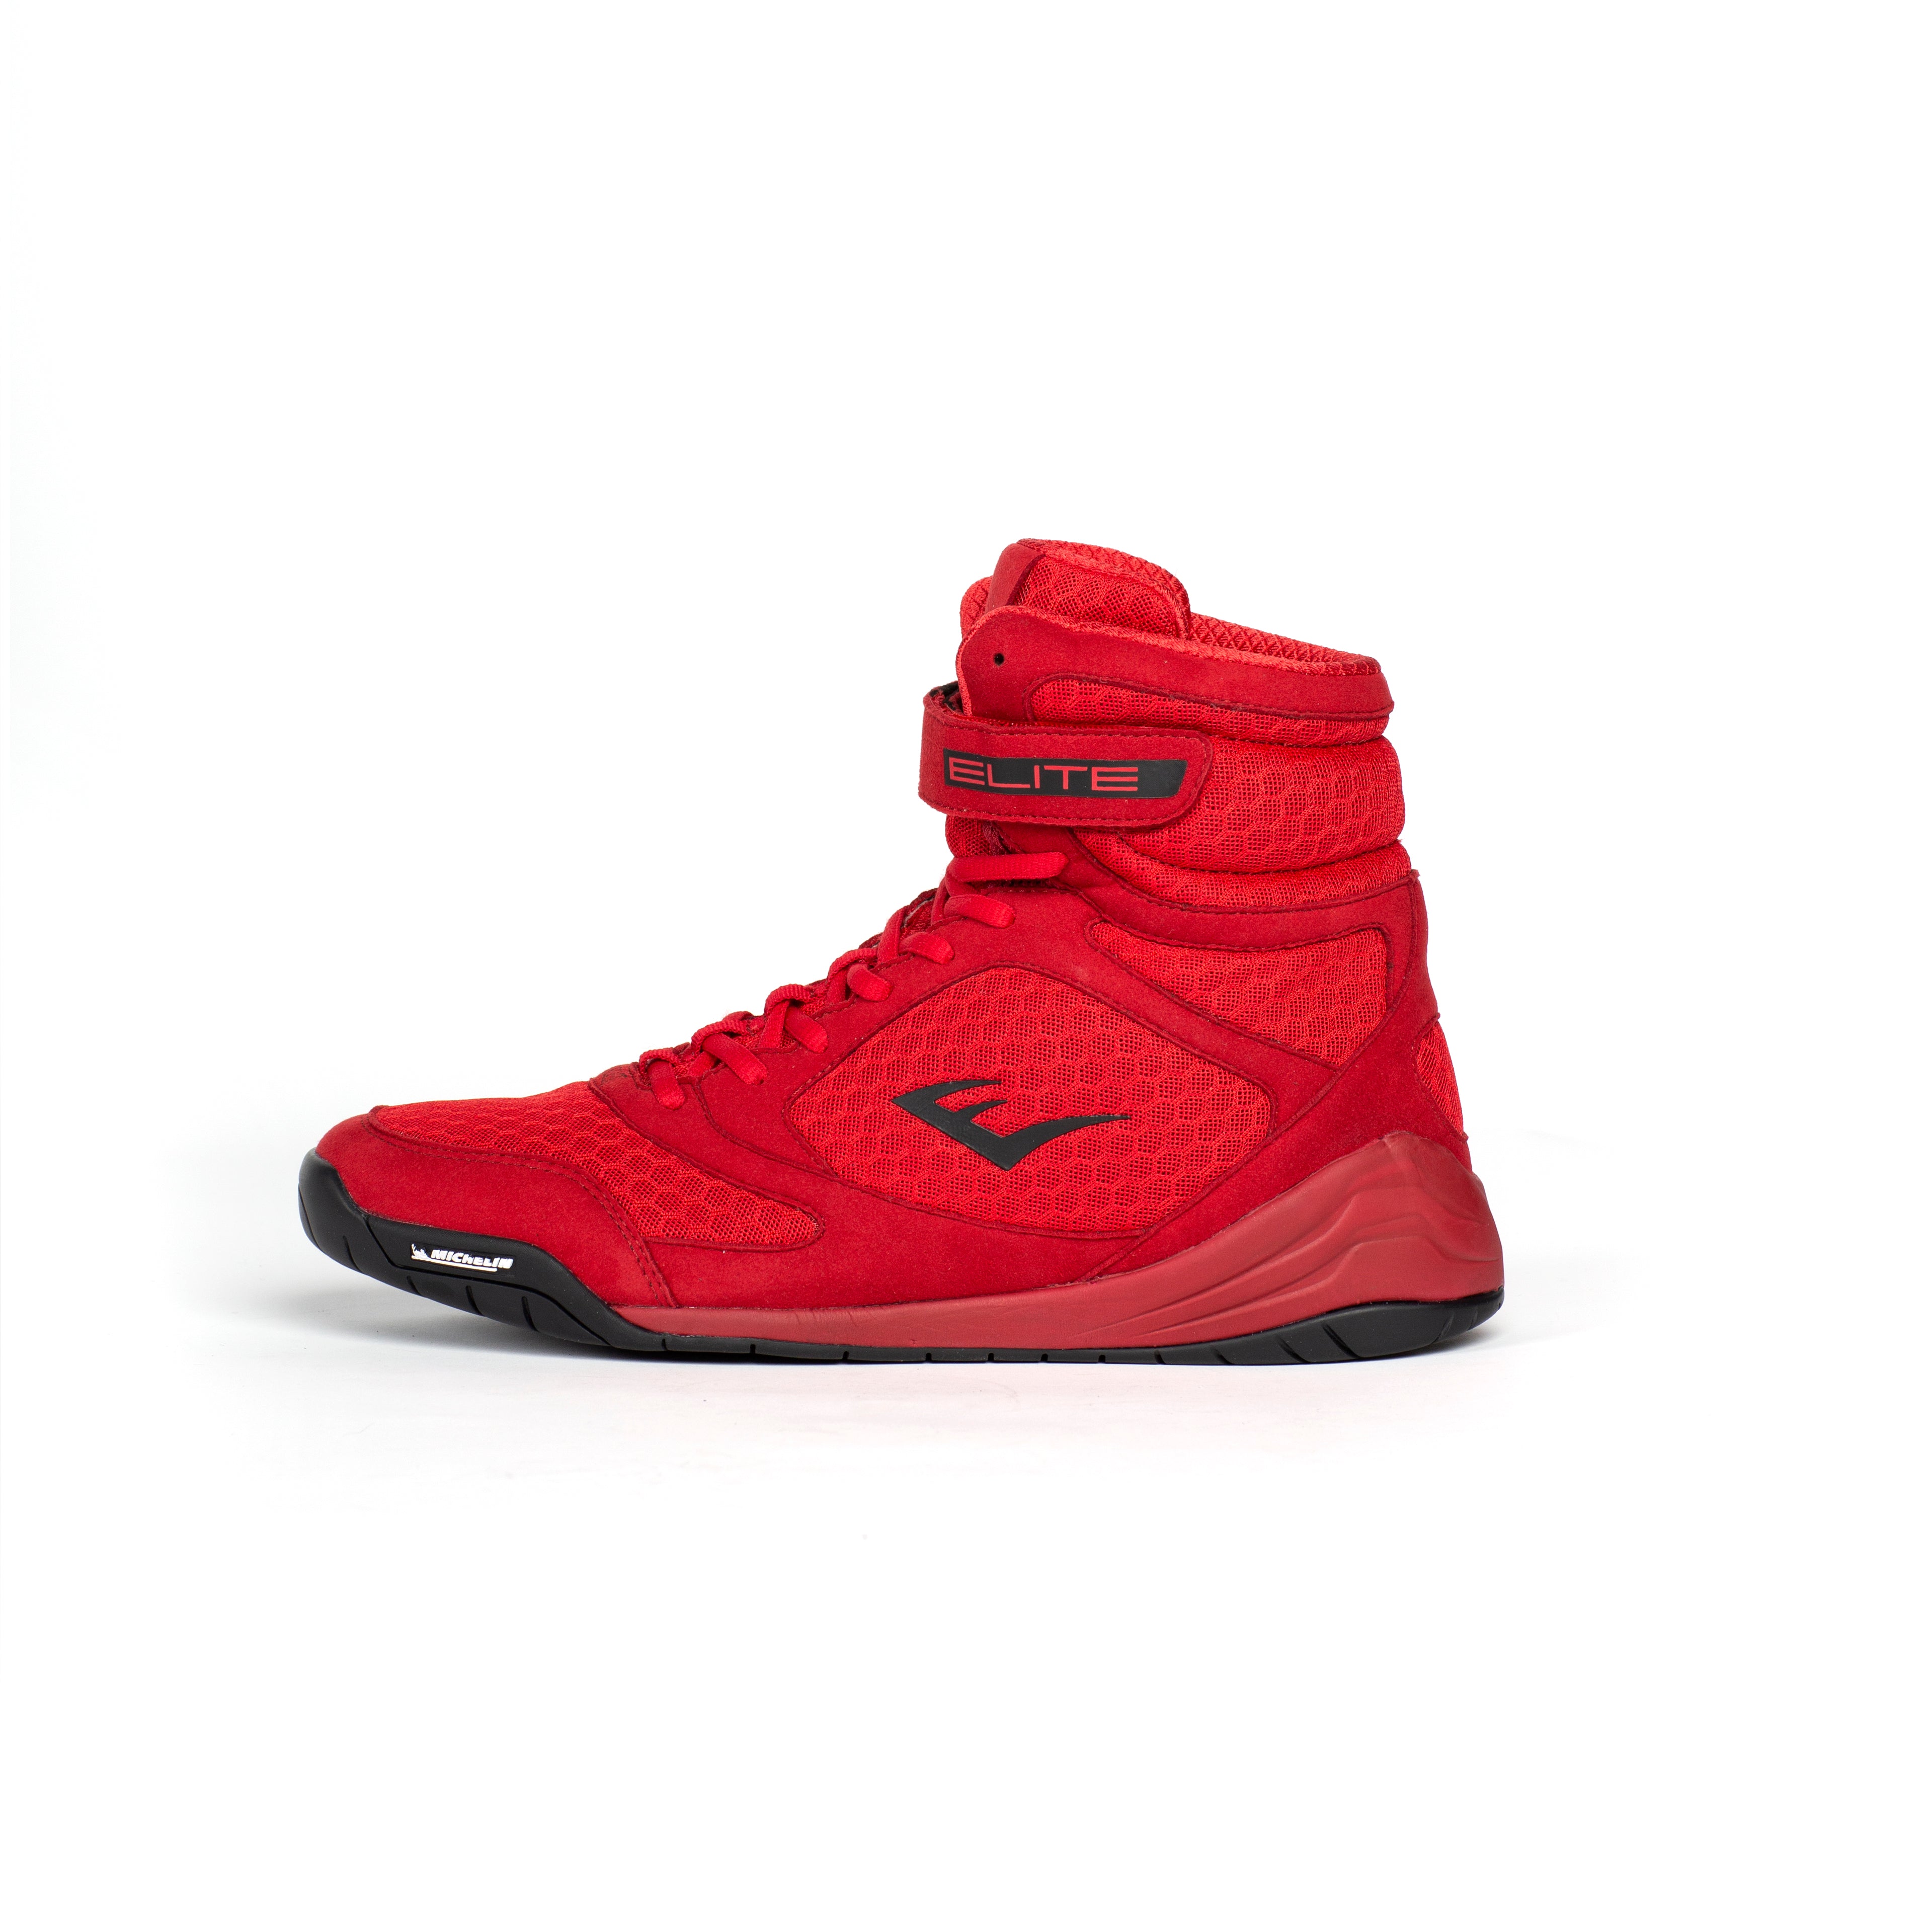 CLEARANCE SALES EVERLAST BOXING SHOES BOOTS LOW TOP Eur 37-46 Red